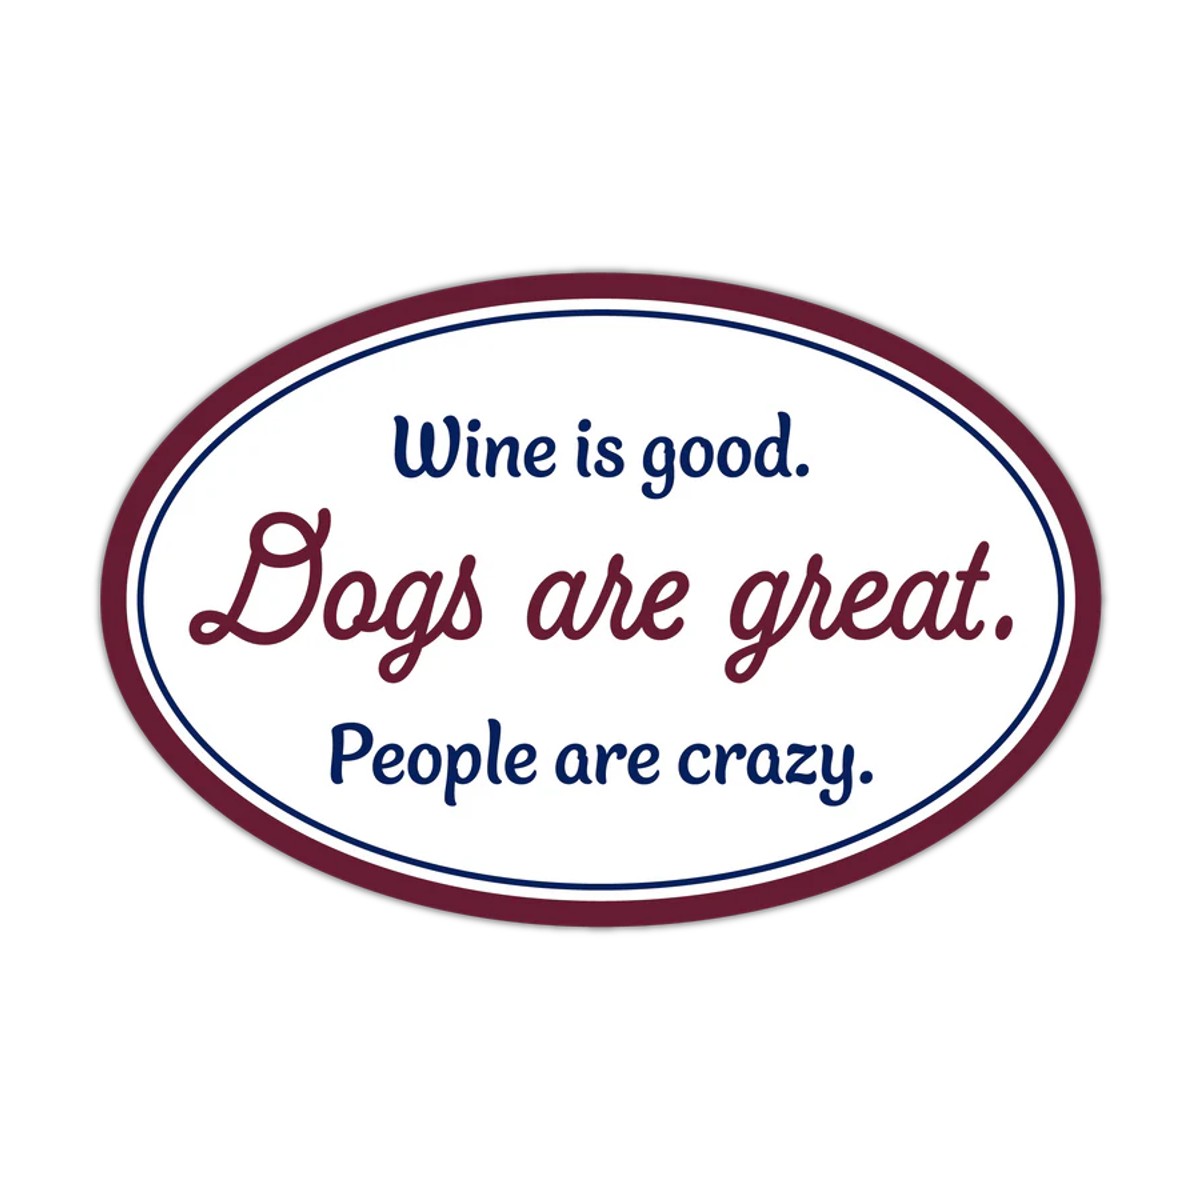 Dog Speak Oval Magnet - Wine is Good. Dogs are Great. People are Crazy